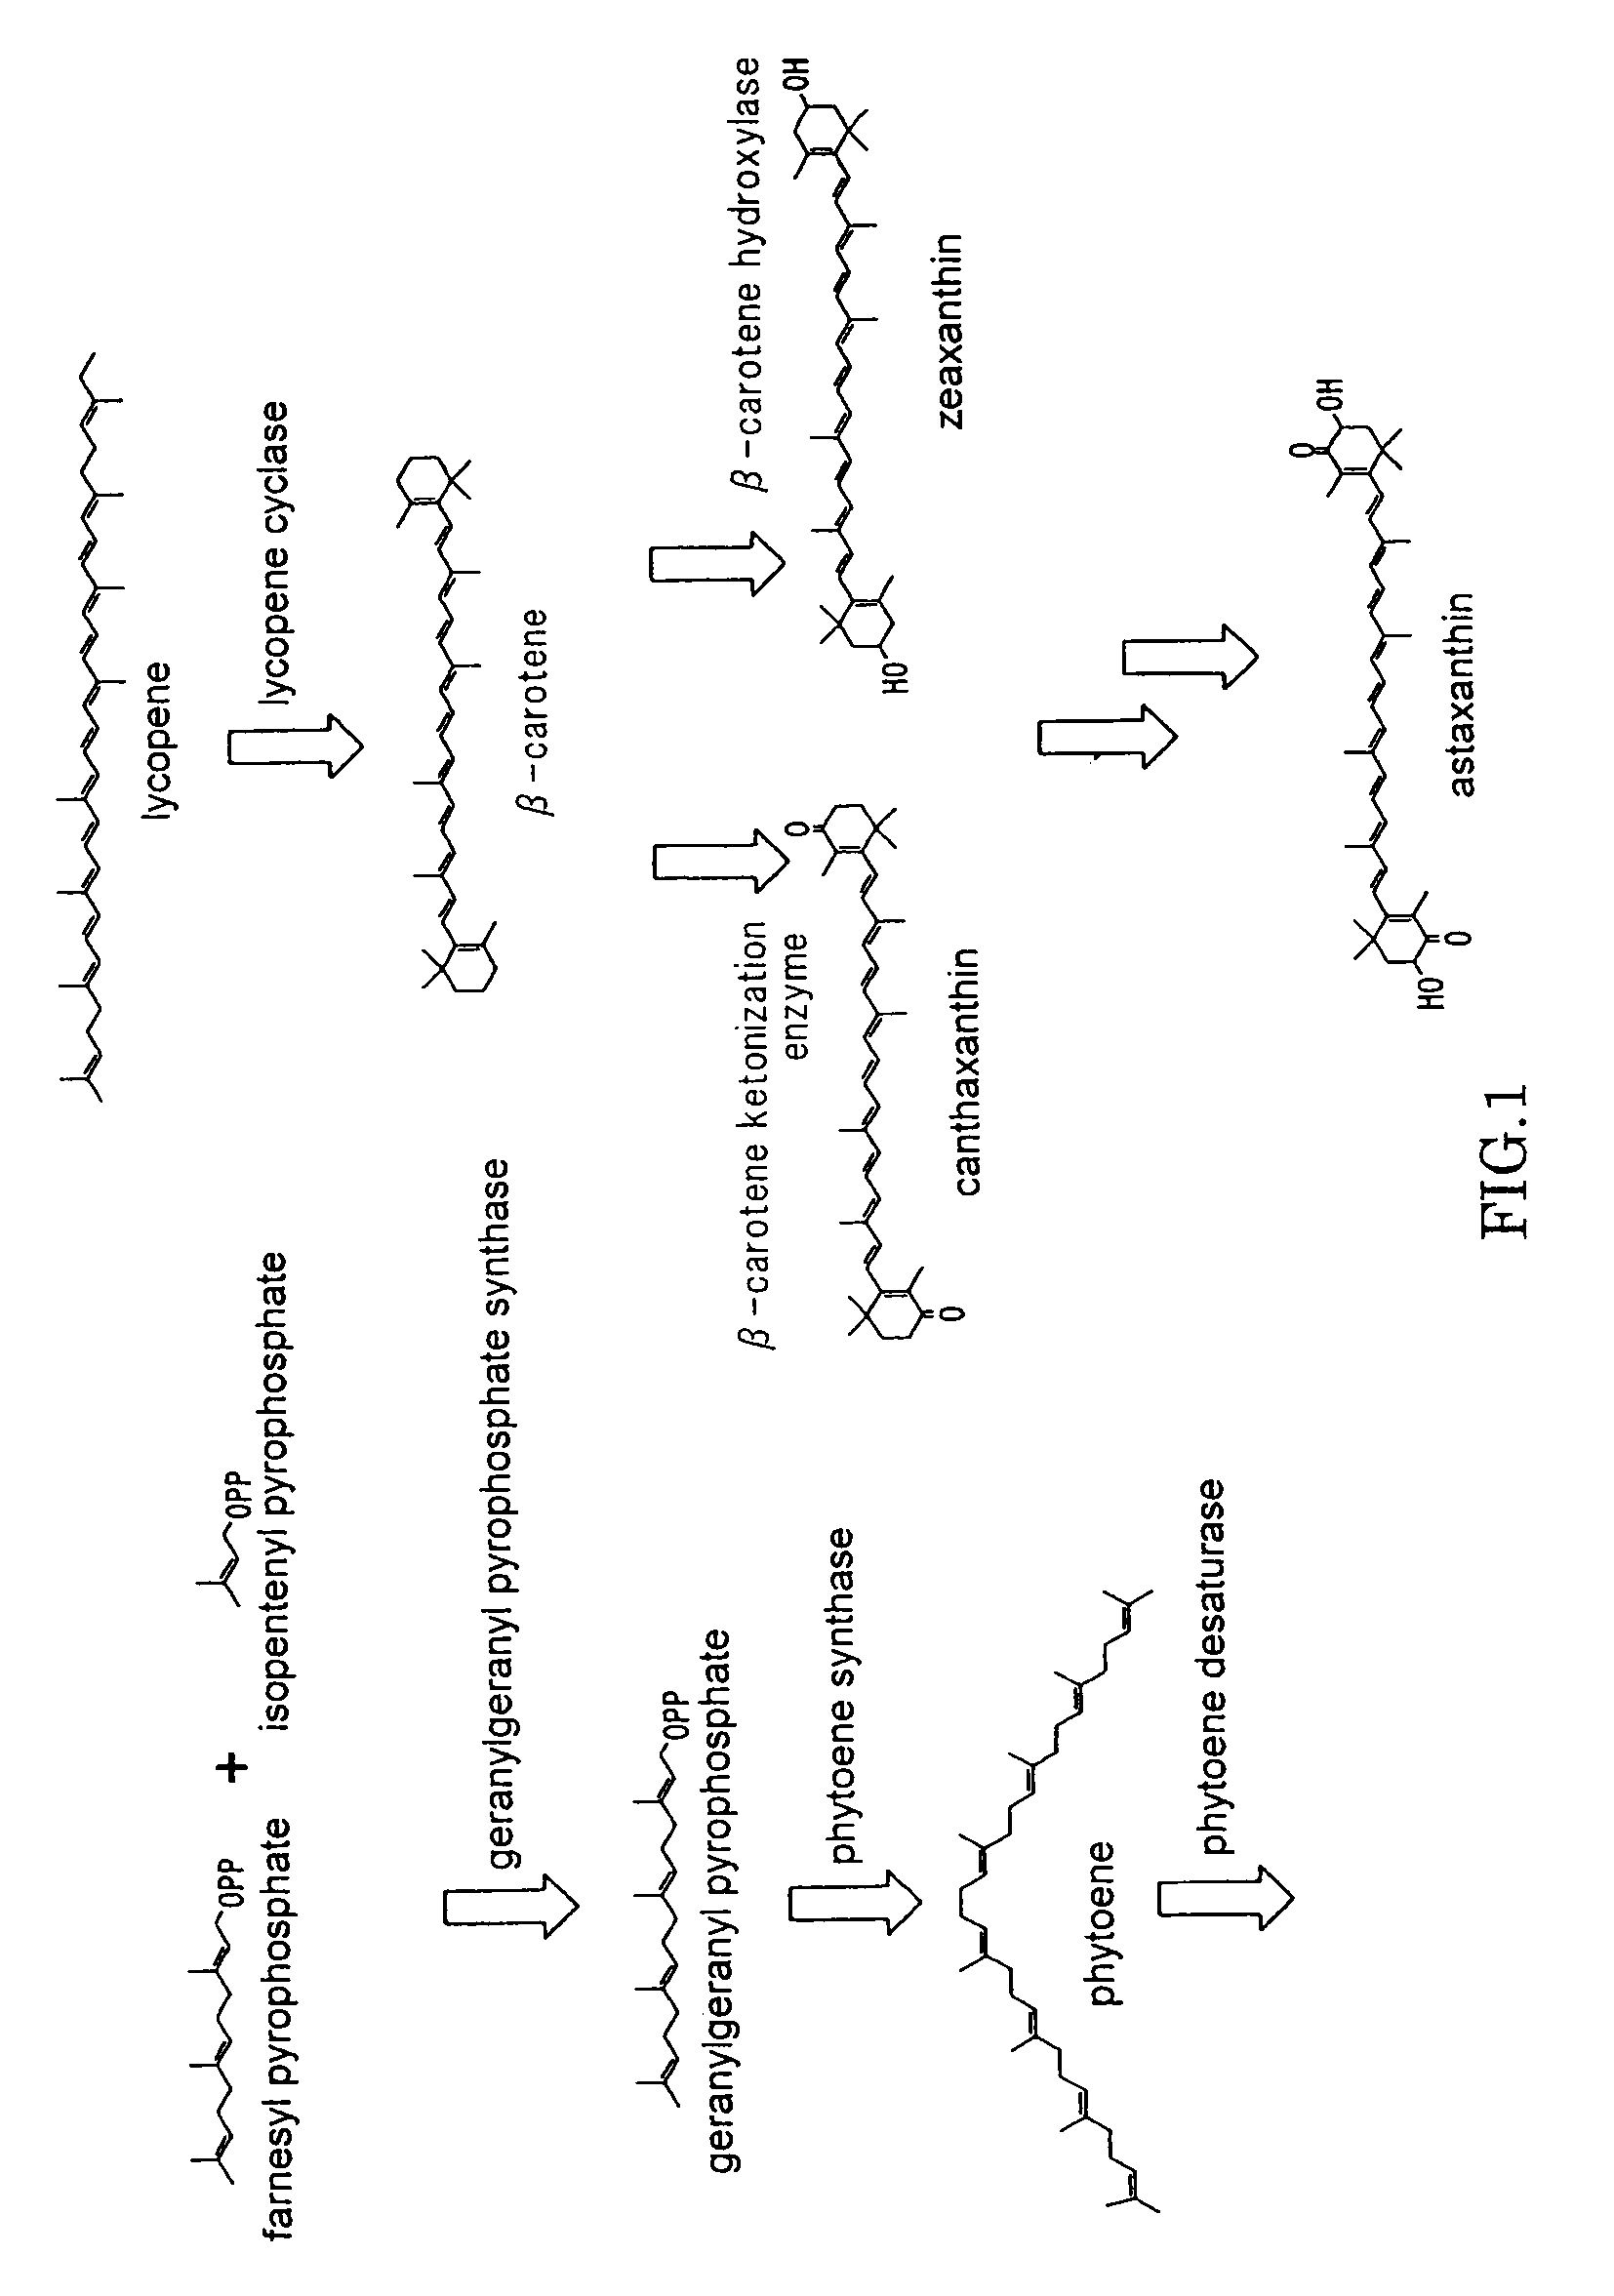 Microorganism and method for producing carotenoid using it